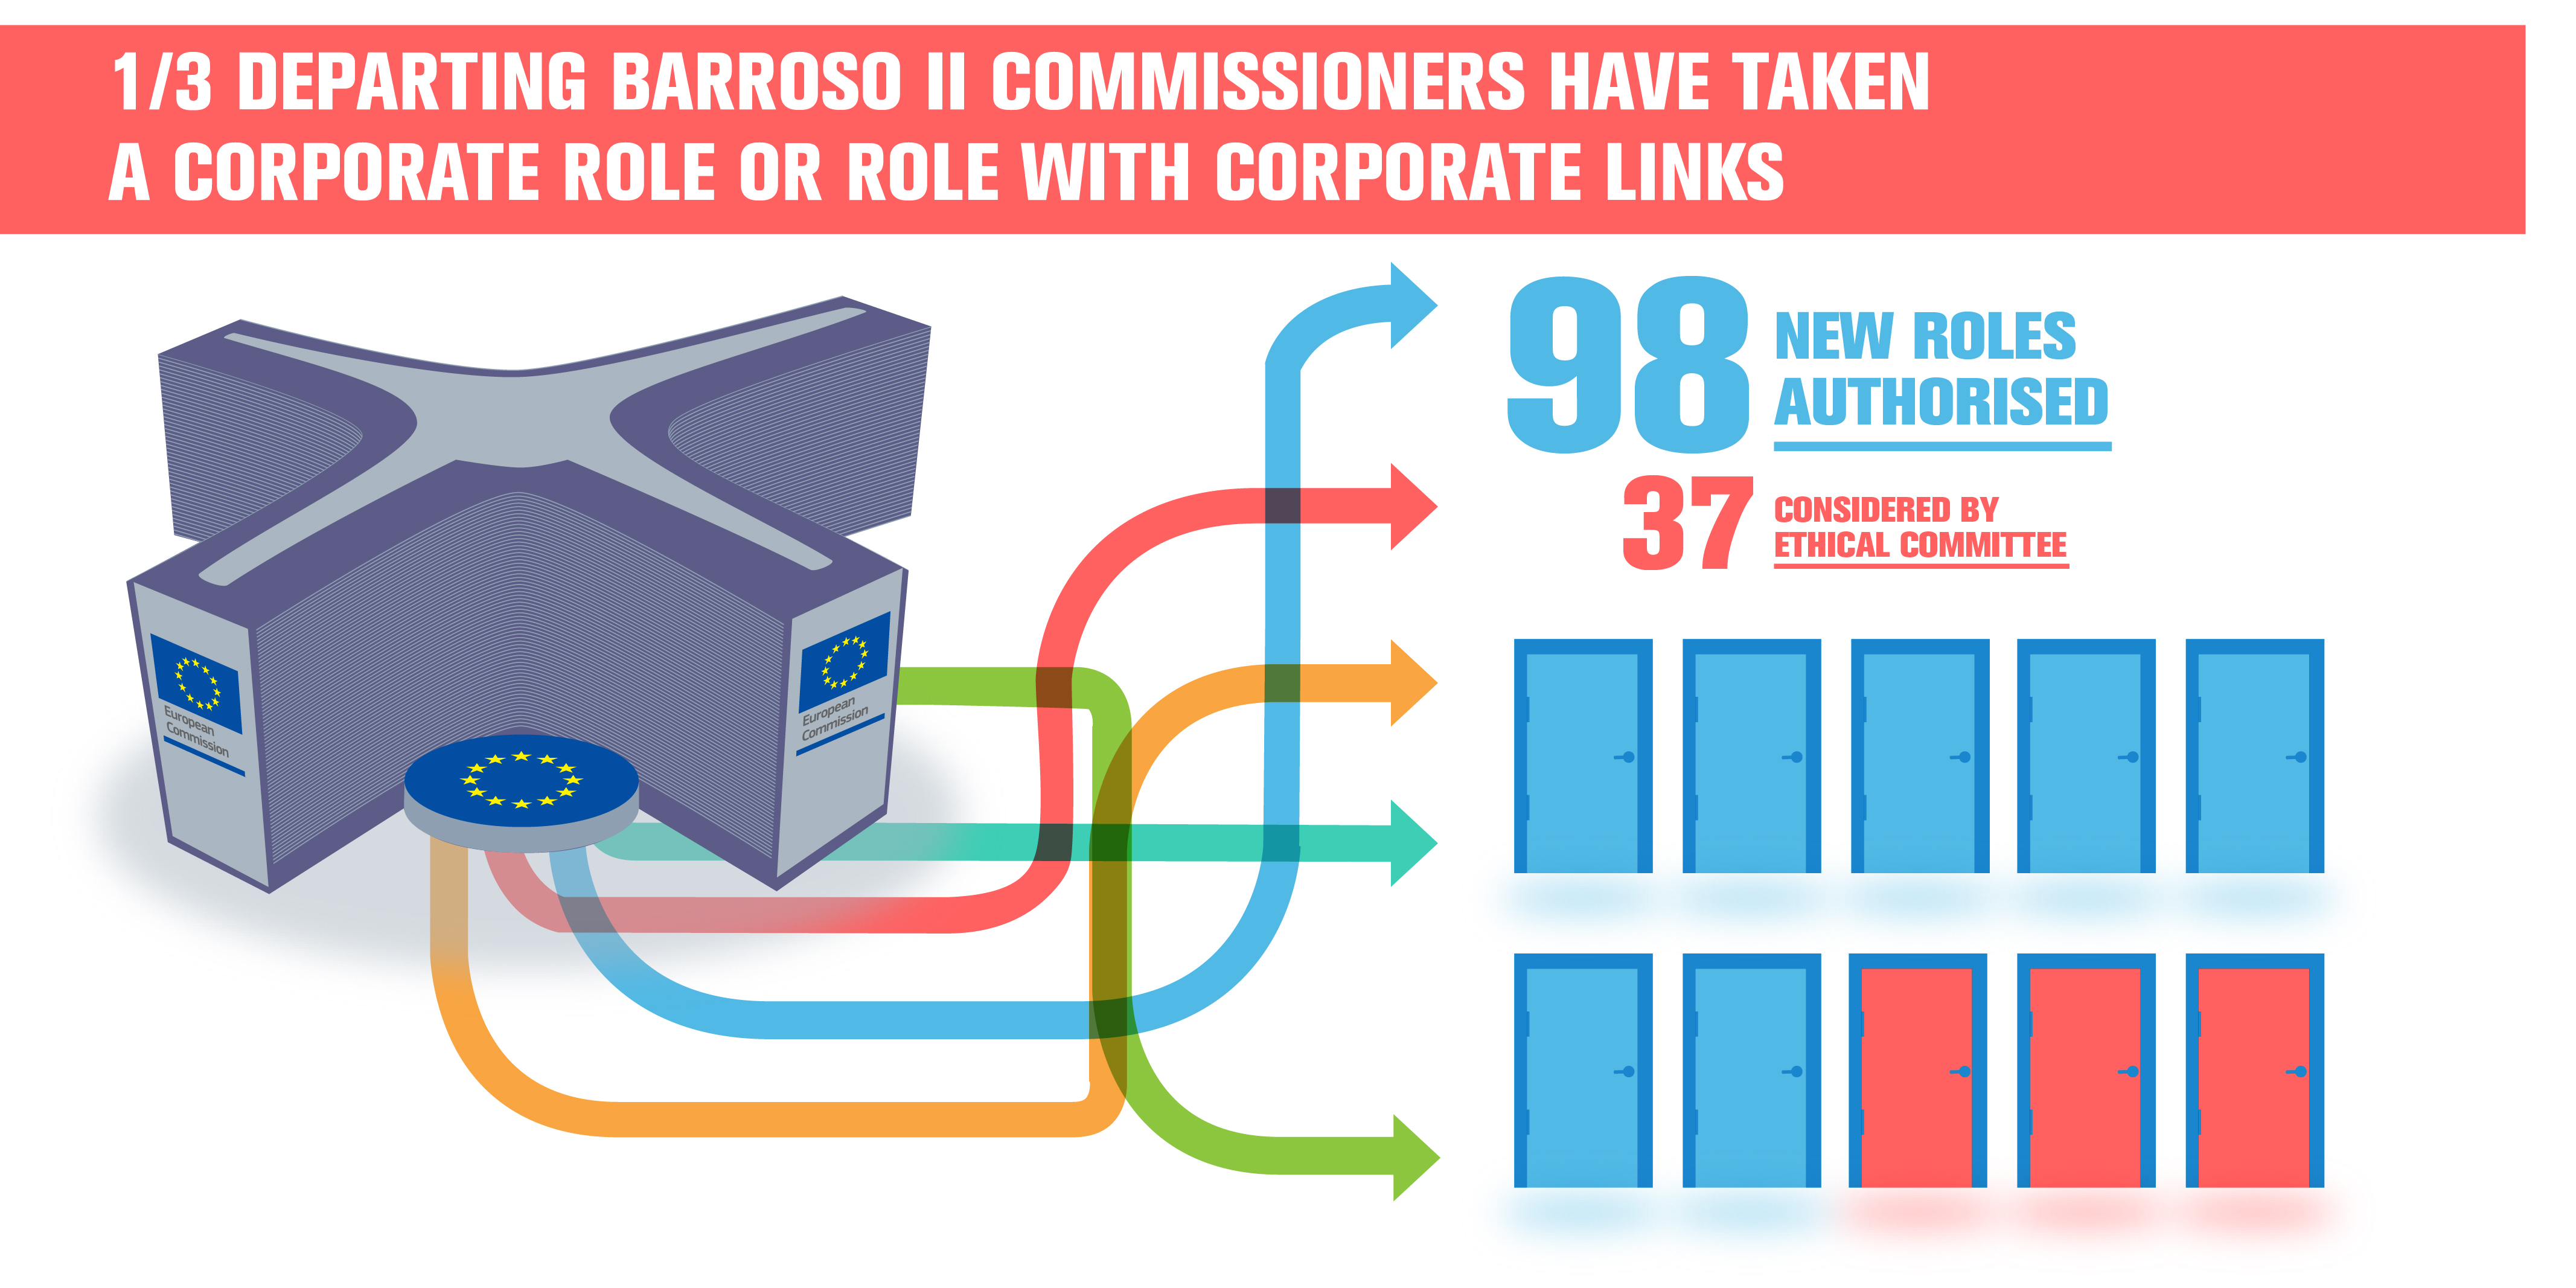 1/3 departing Barroso II commissioners have taken a corporate role or role with corporate links